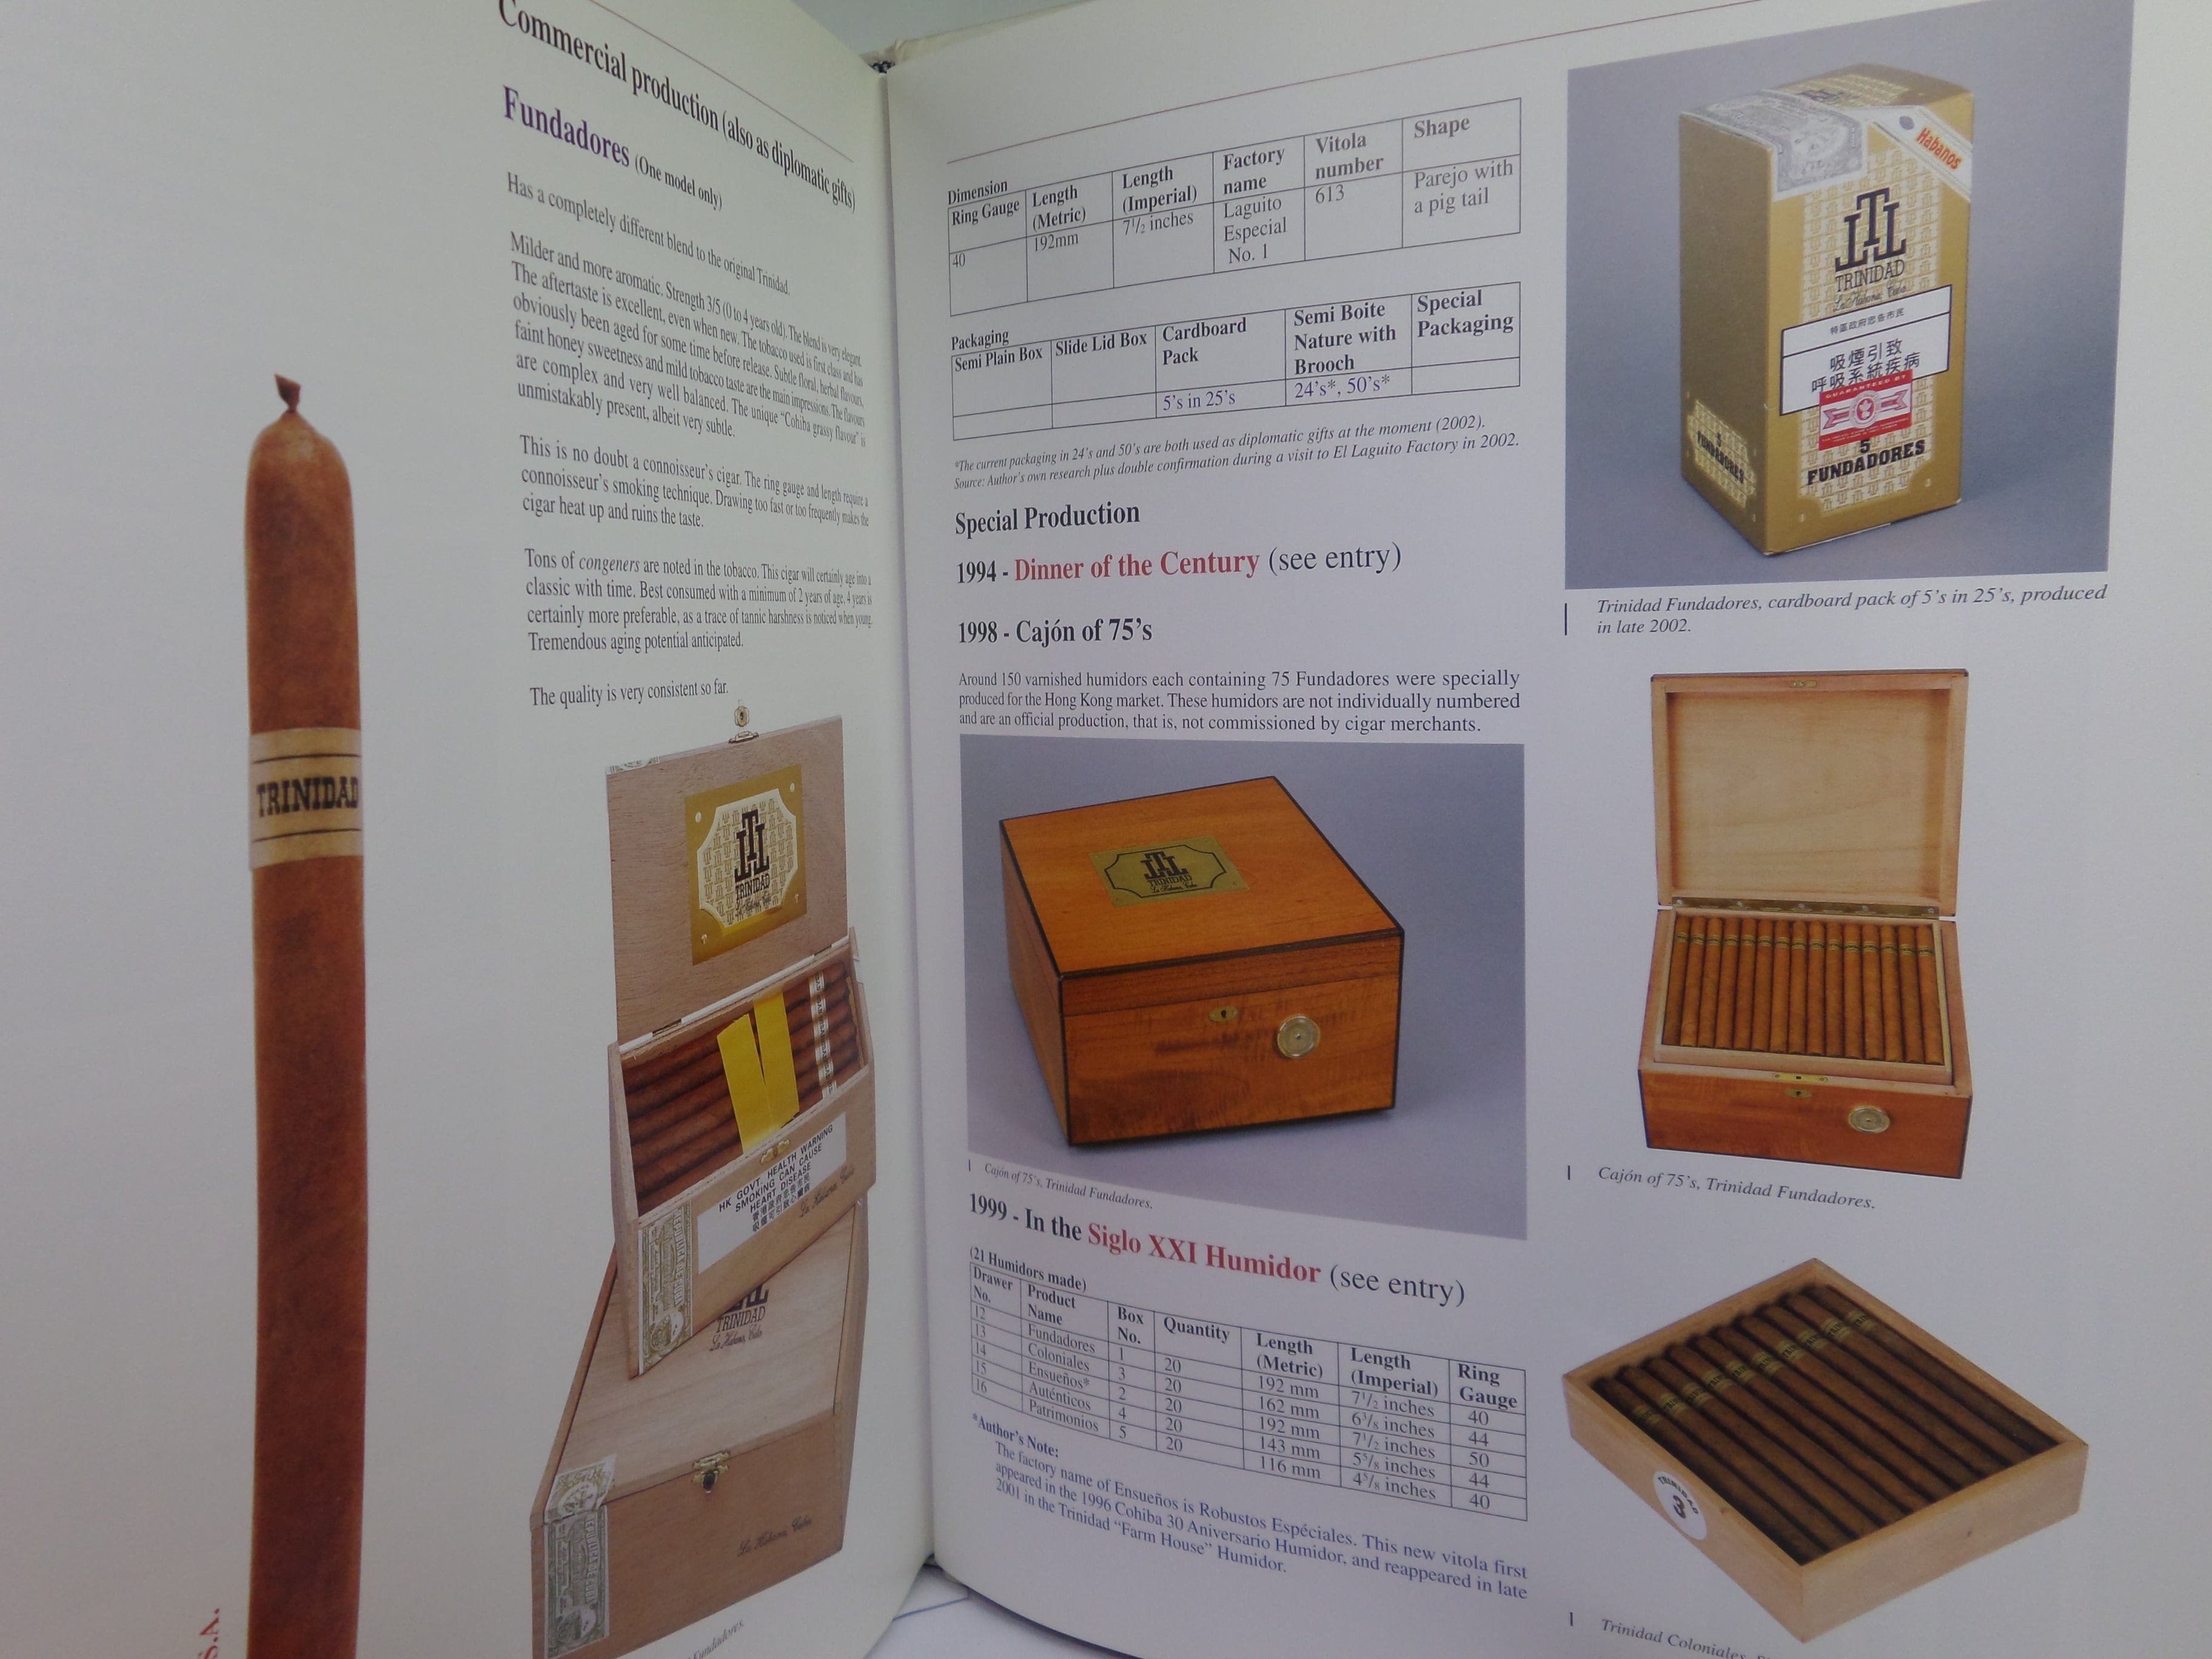 AN ILLUSTRATED ENCYCLOPAEDIA OF POST-REVOLUTION HAVANA CIGARS BY MIN RON NEE 2003 FIRST EDITION